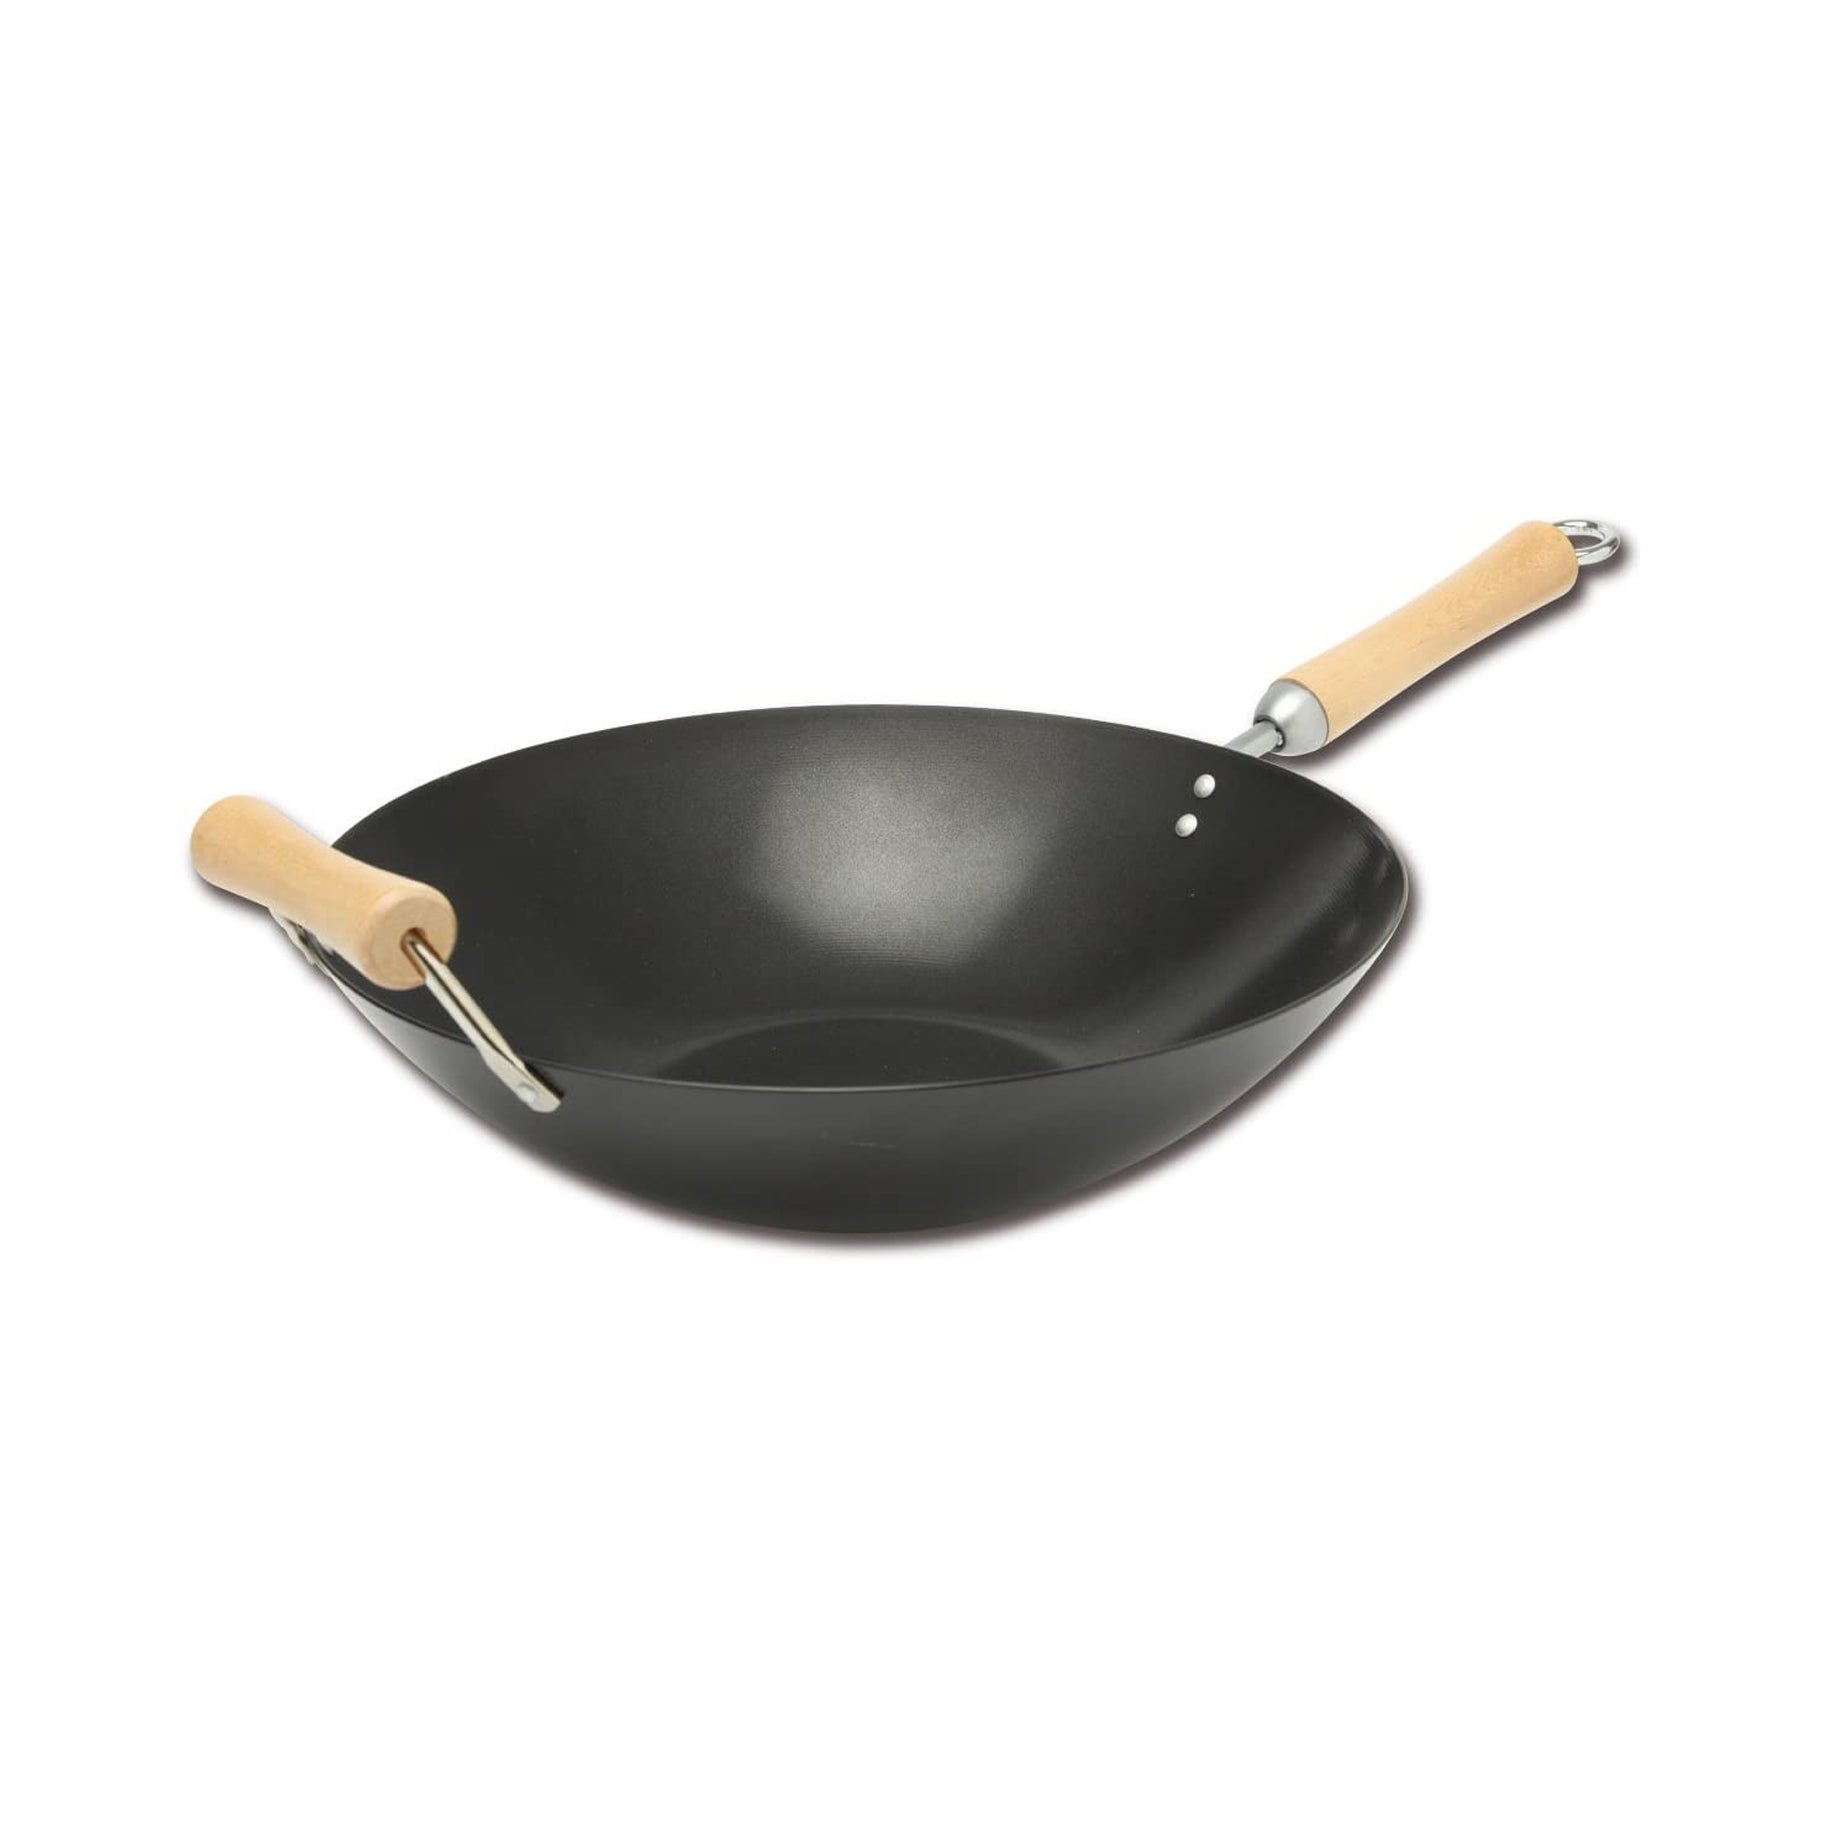 The 7 Best Non-Toxic Woks for Your Green Kitchen - LeafScore